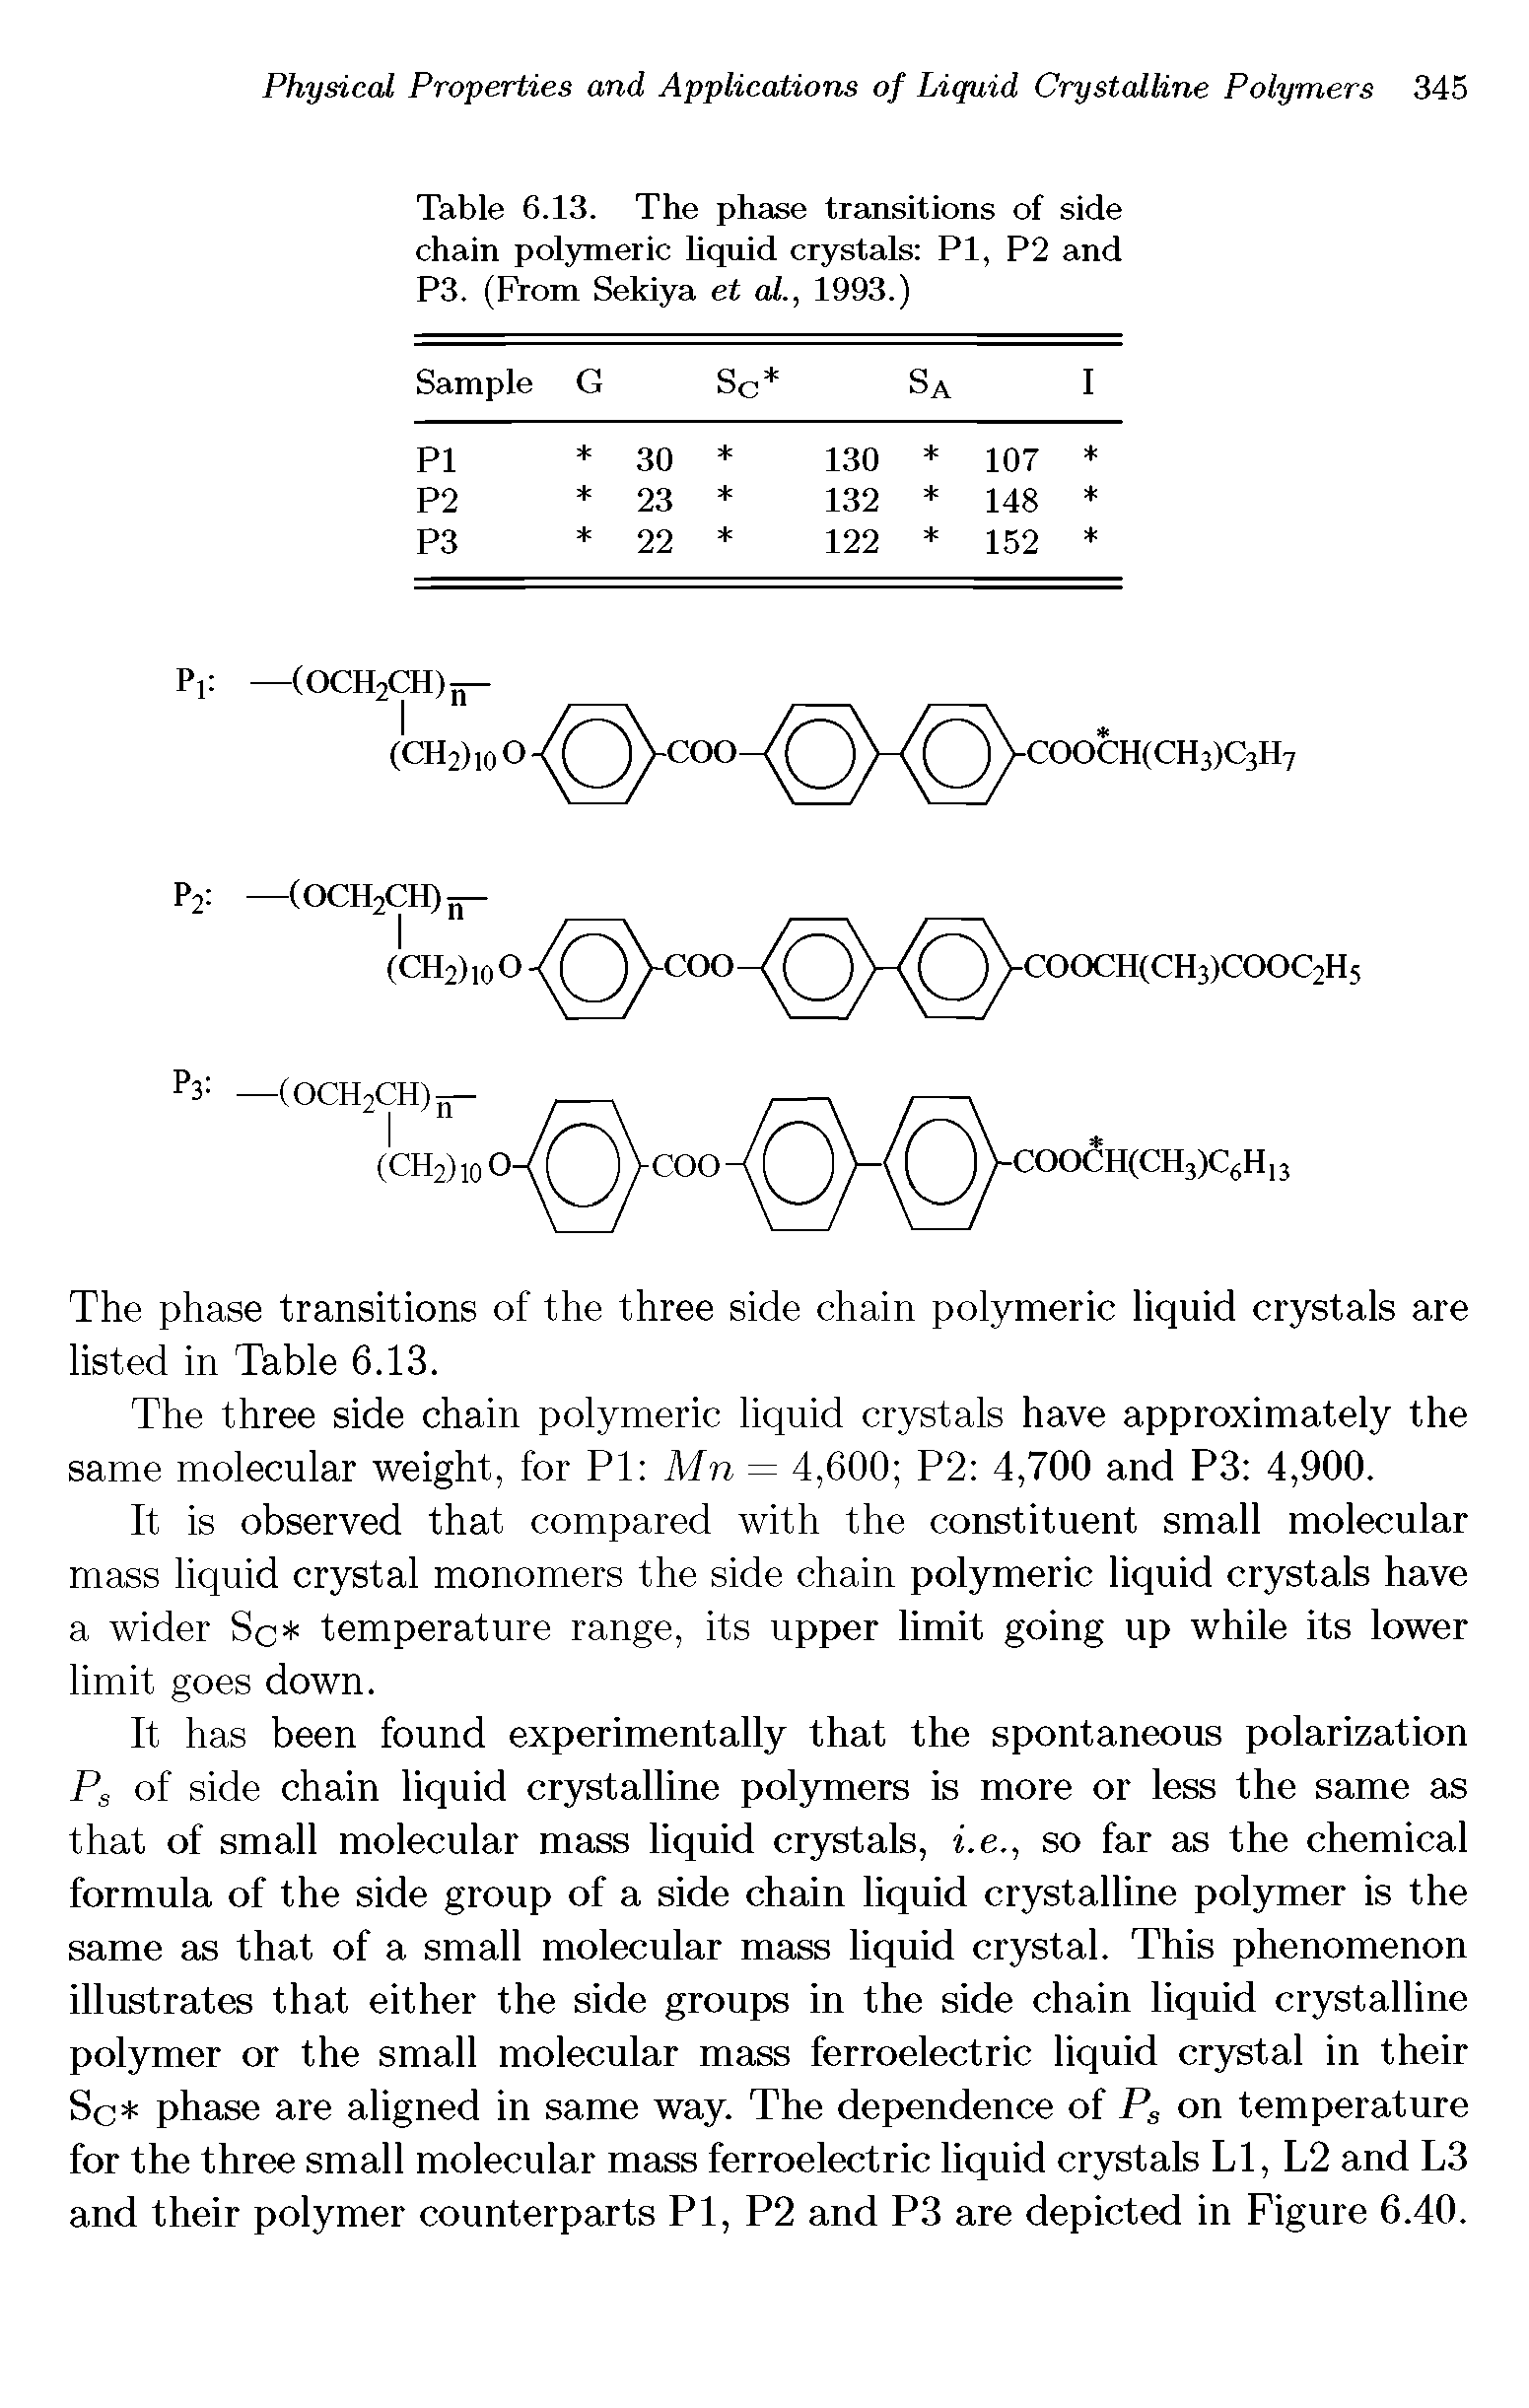 Table 6.13. The phase transitions of side chain polymeric liquid crystals PI, P2 and P3. (From Sekiya et al., 1993.)...